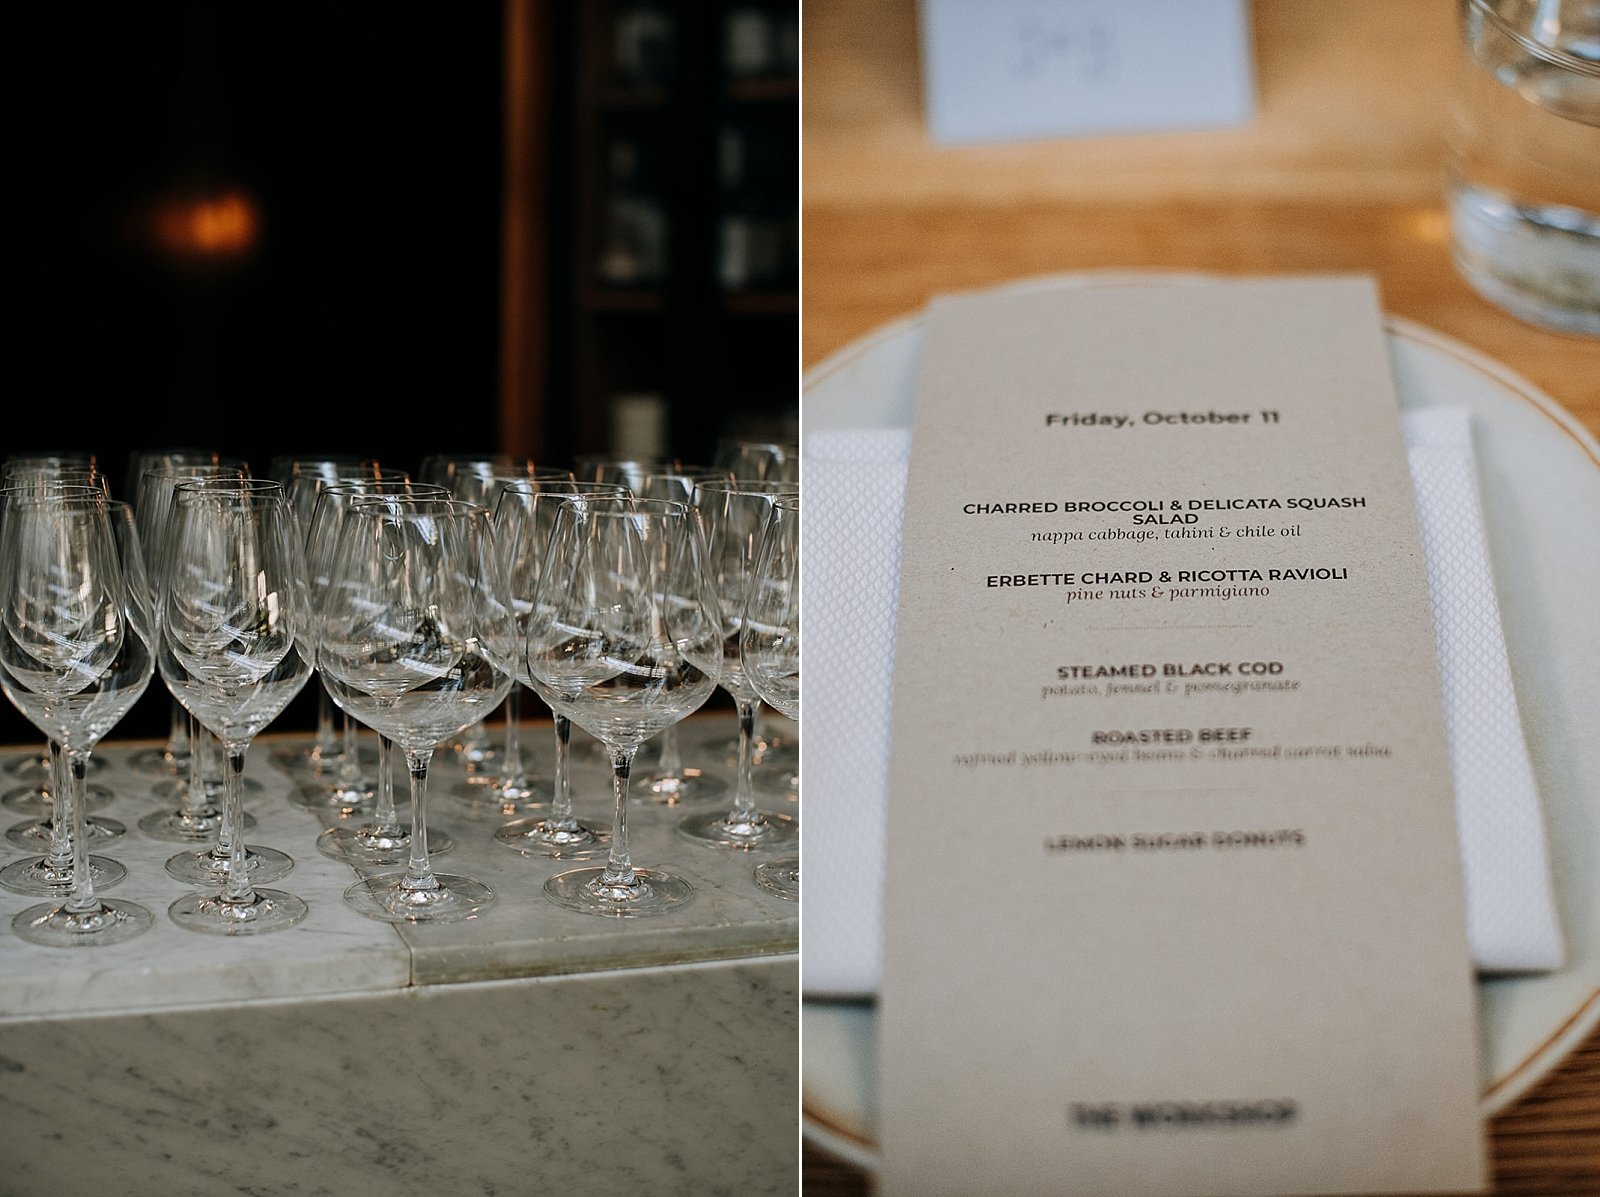  wine glasses and wedding menu printed and placed on table setting  